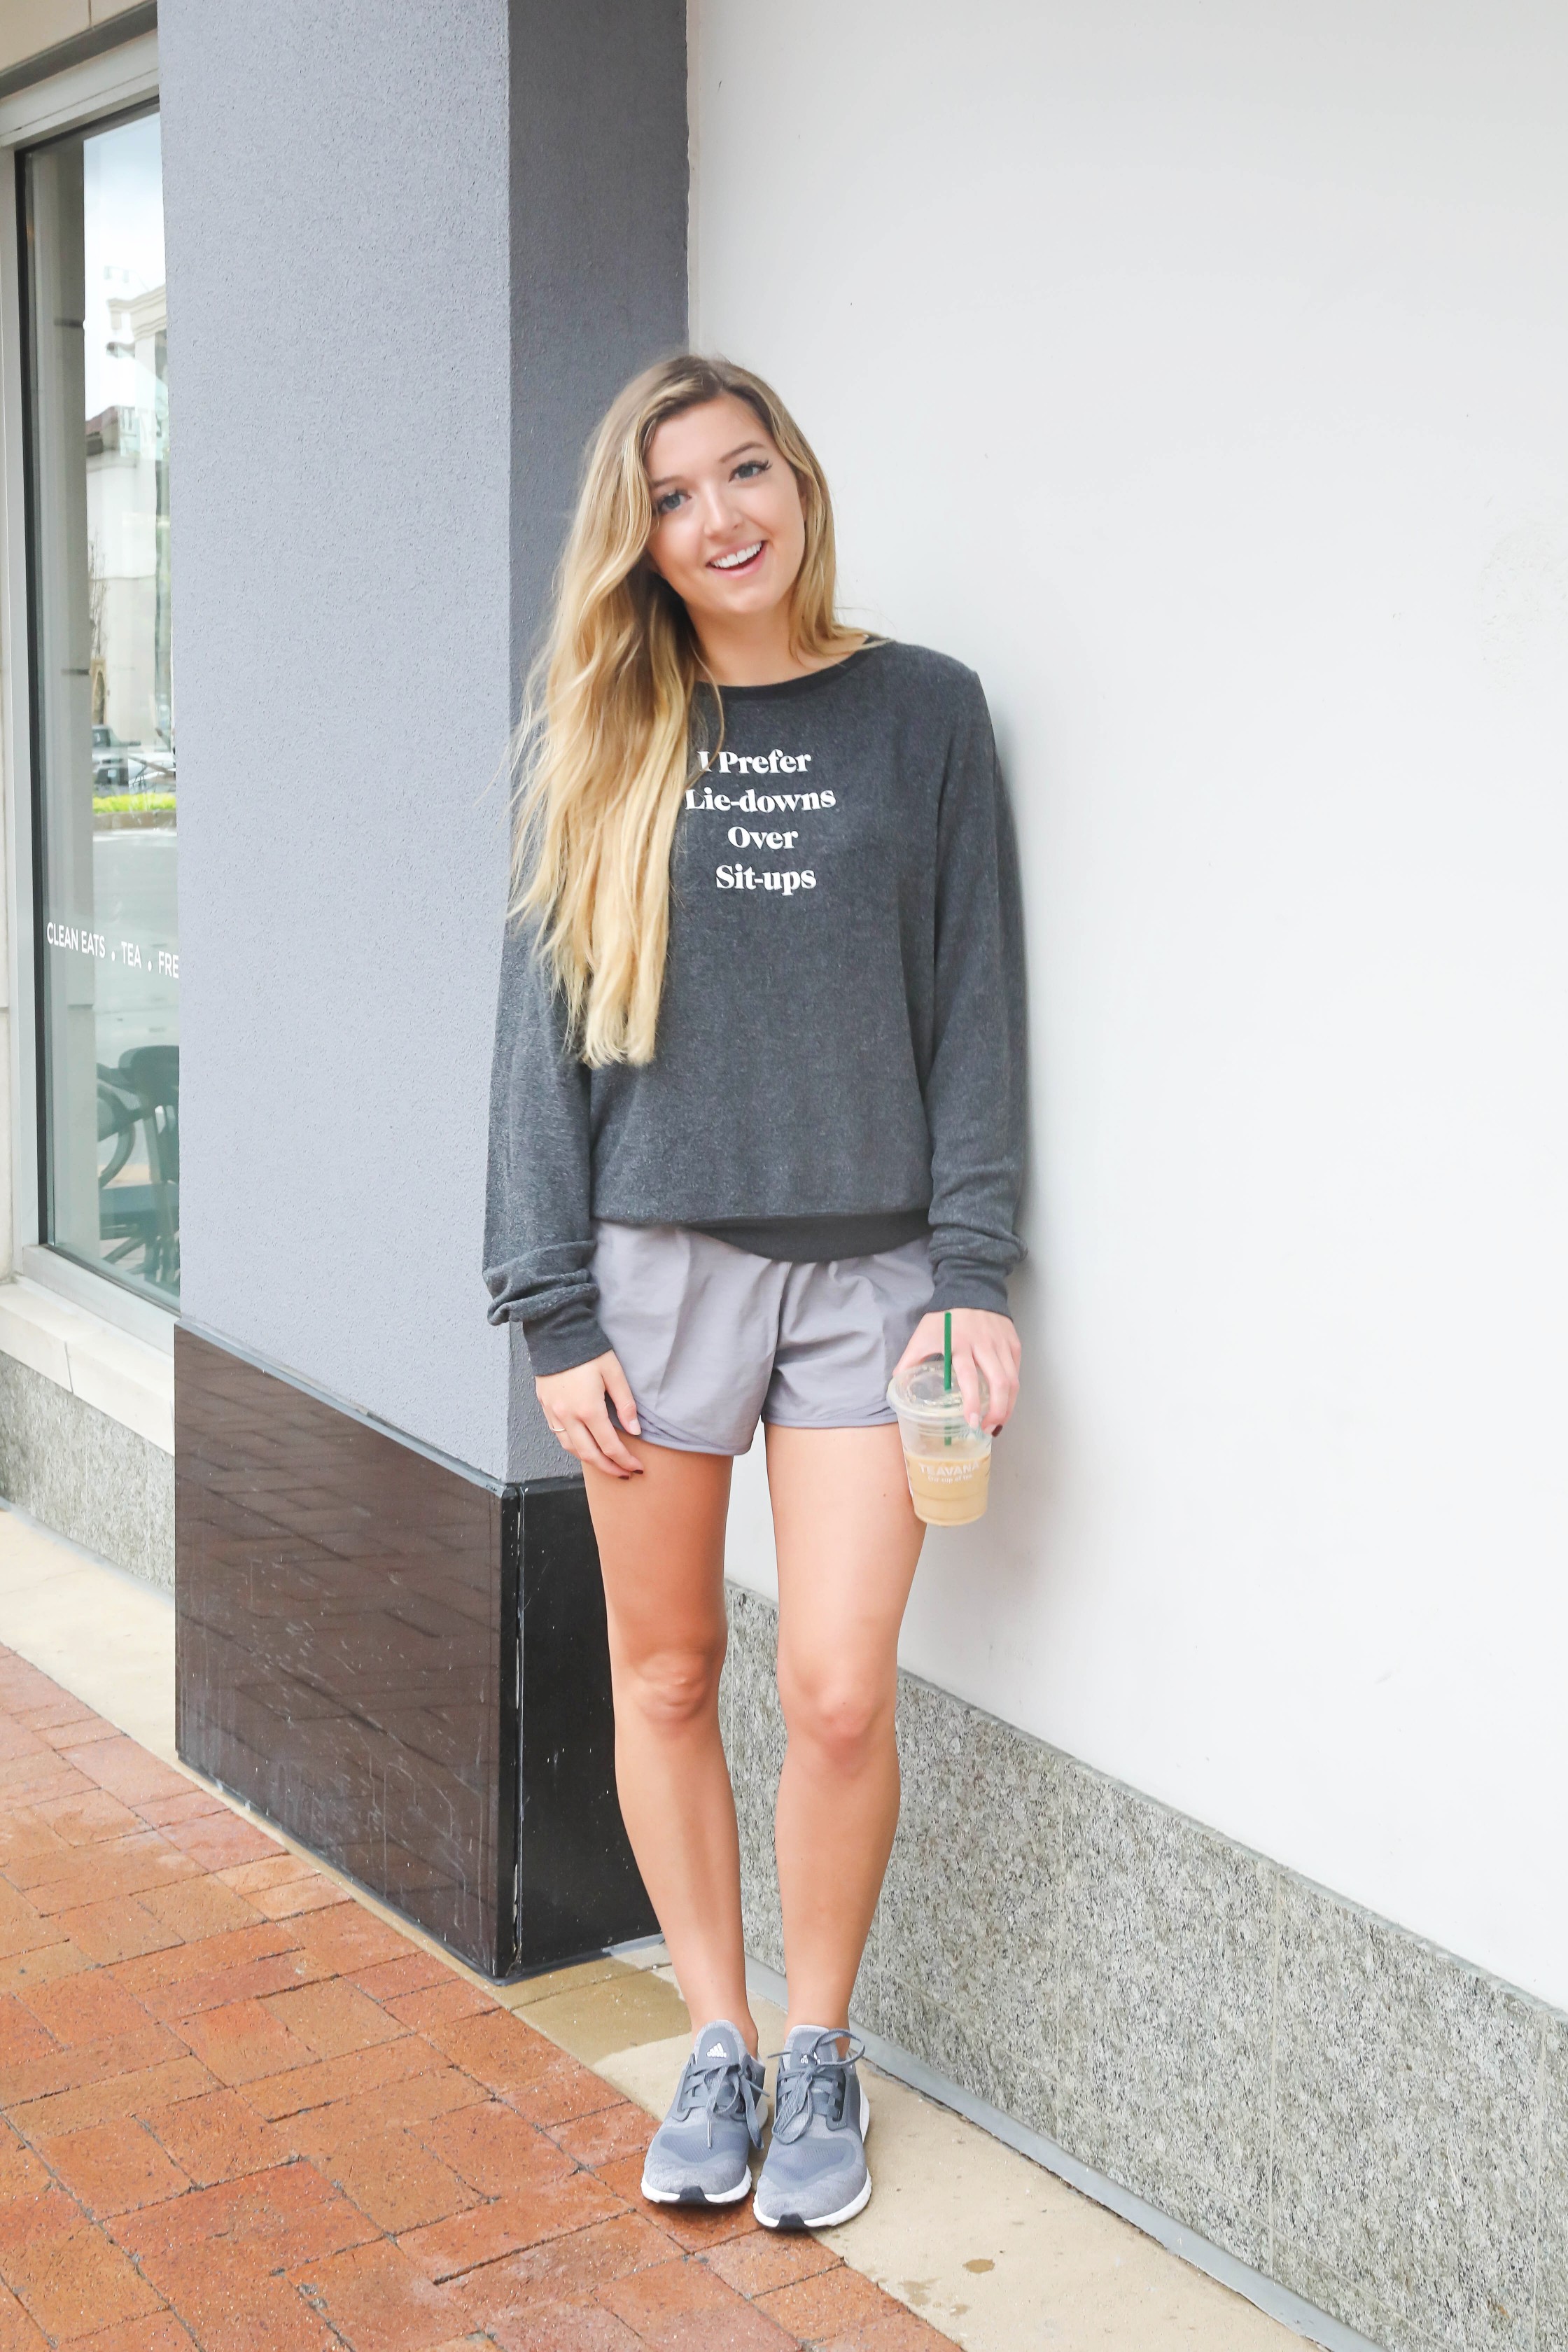 Comfy clothes to wear at home and stay stylish on lazy days